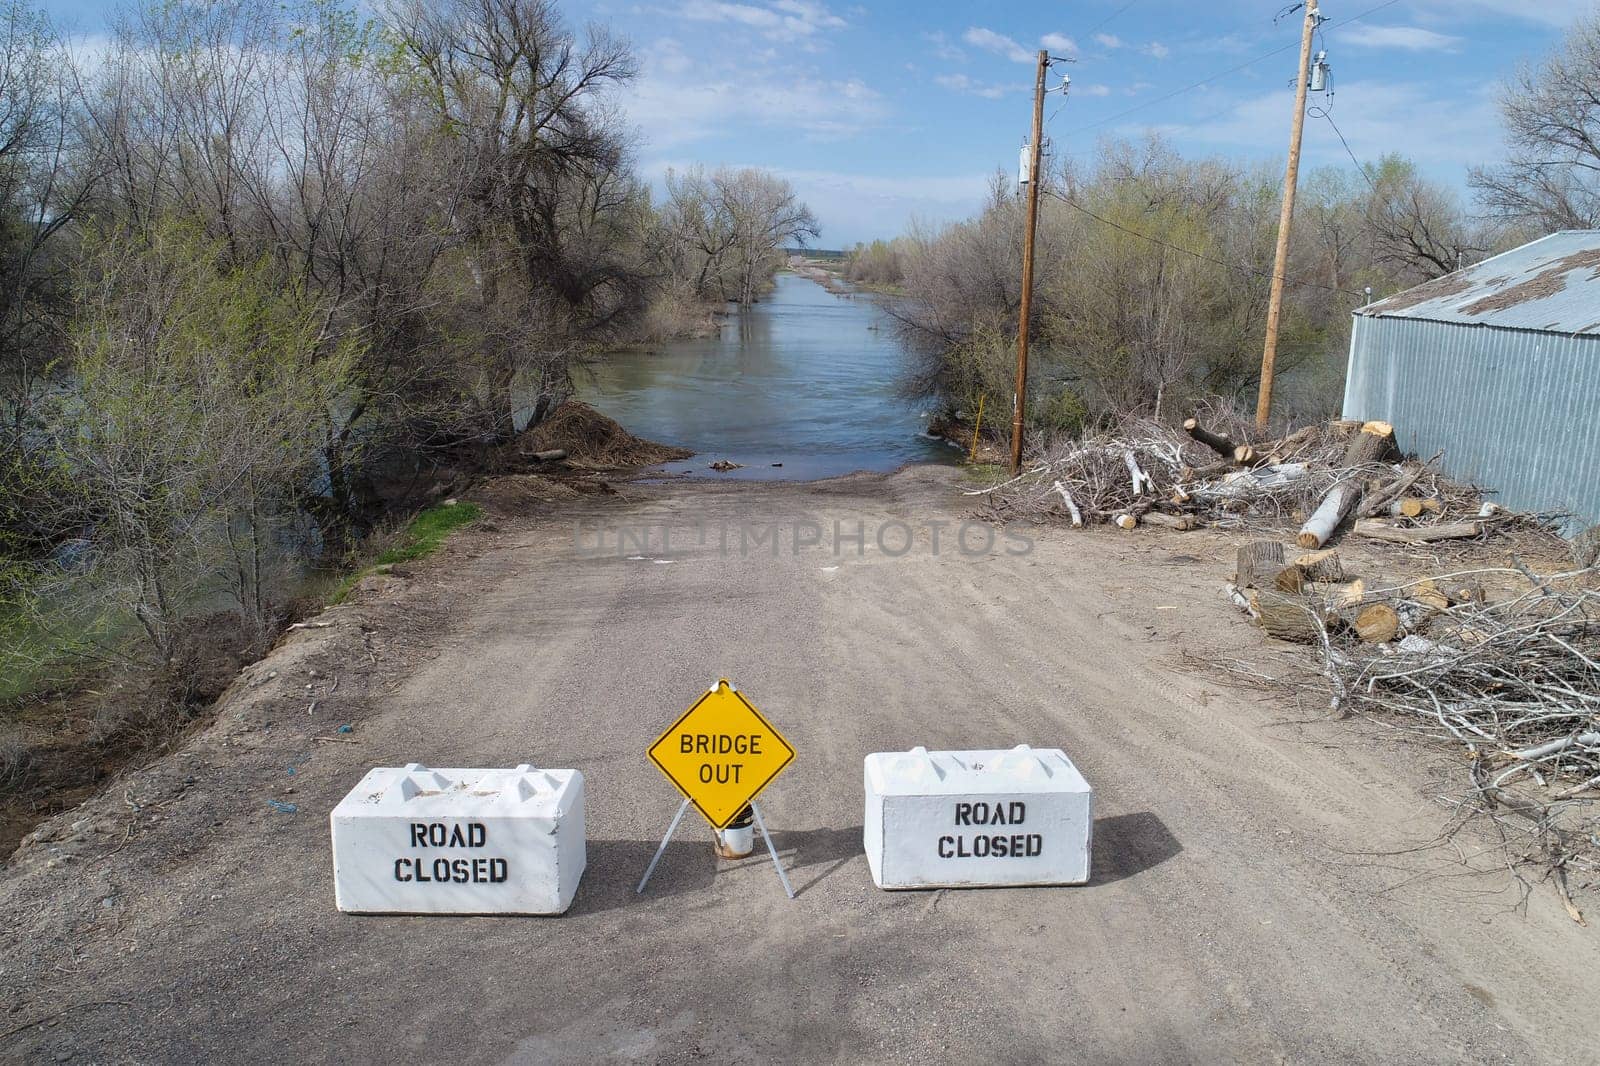 Flooded road with closed sign by txking